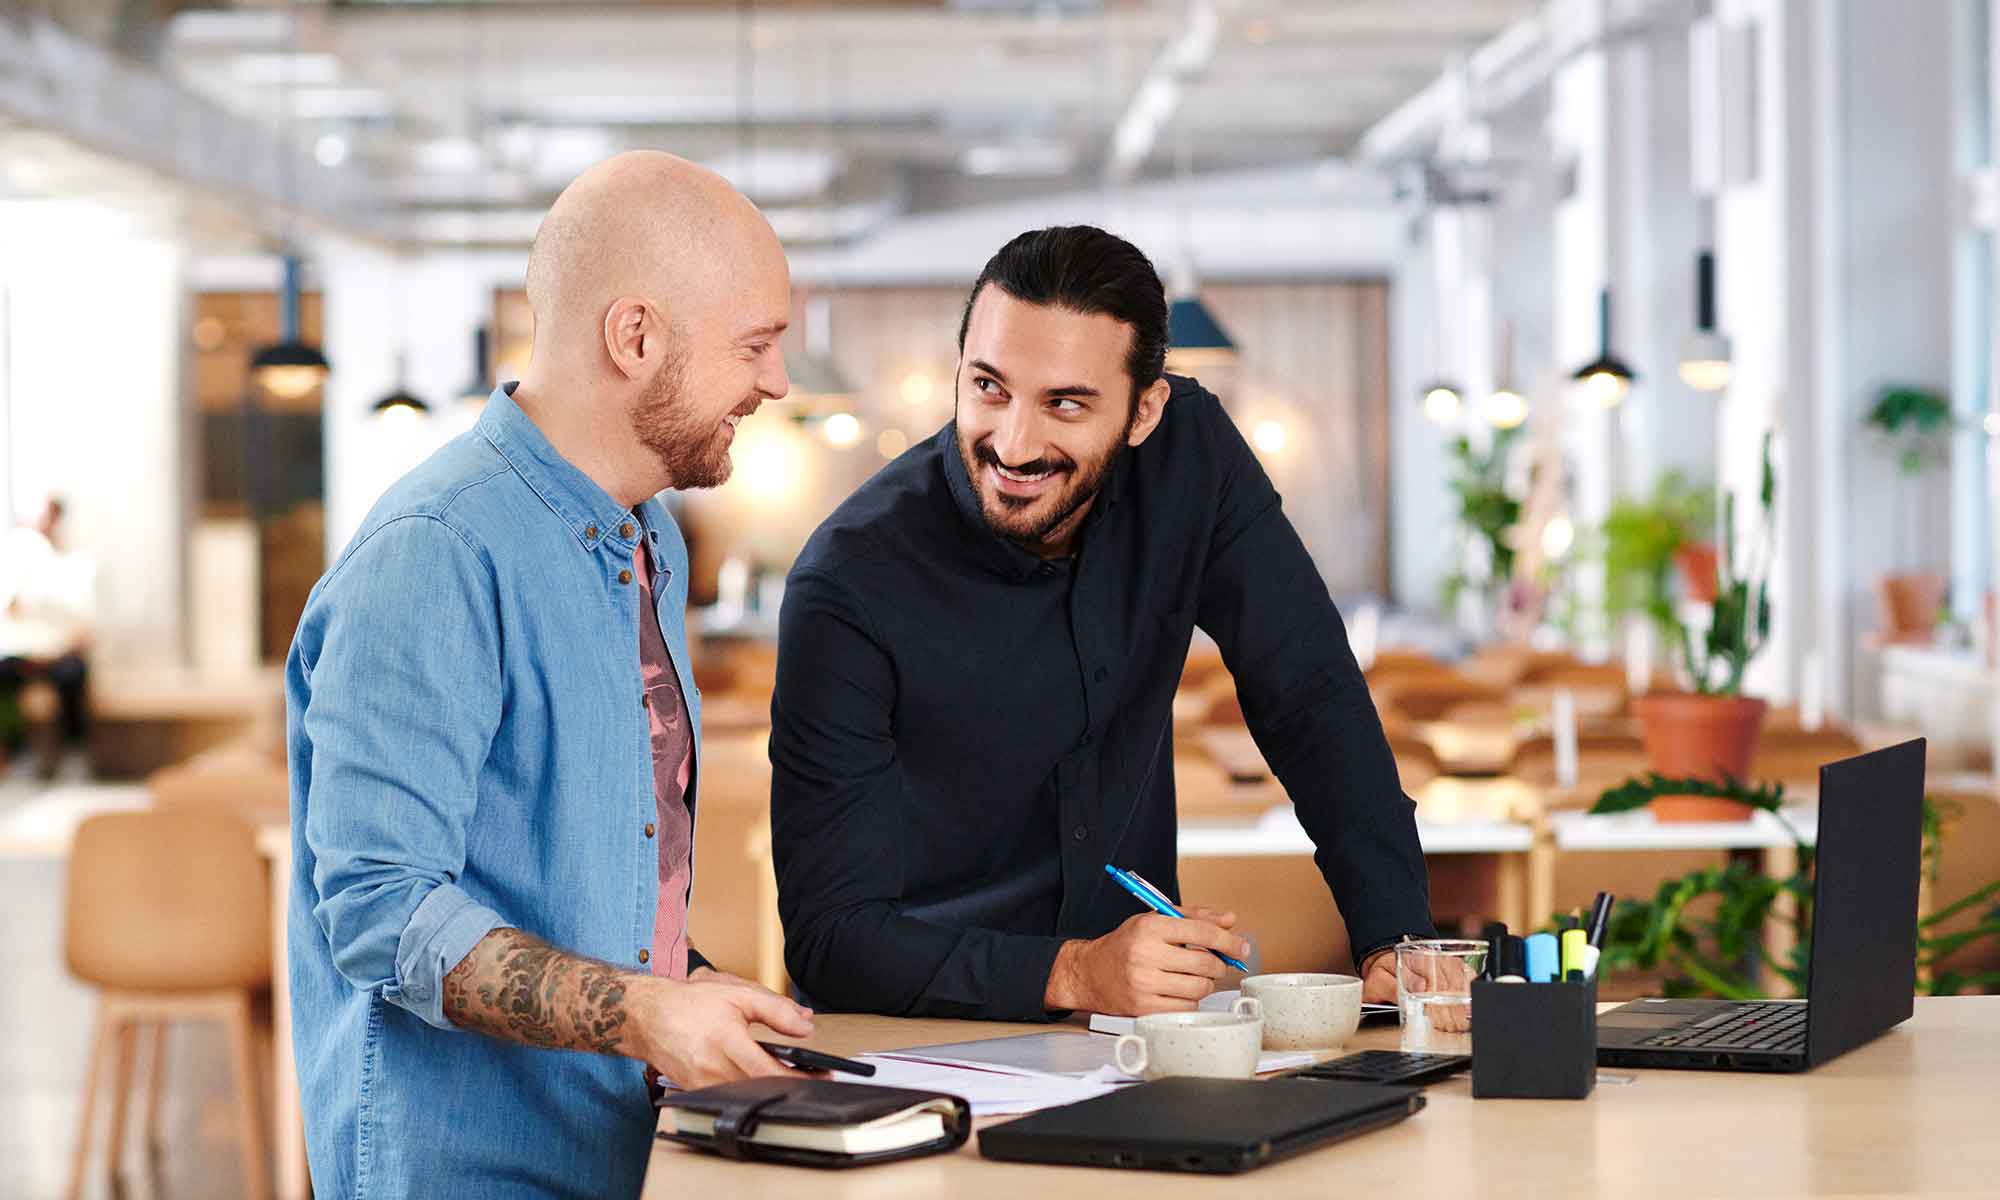 Two men at a workplace smiling at each other